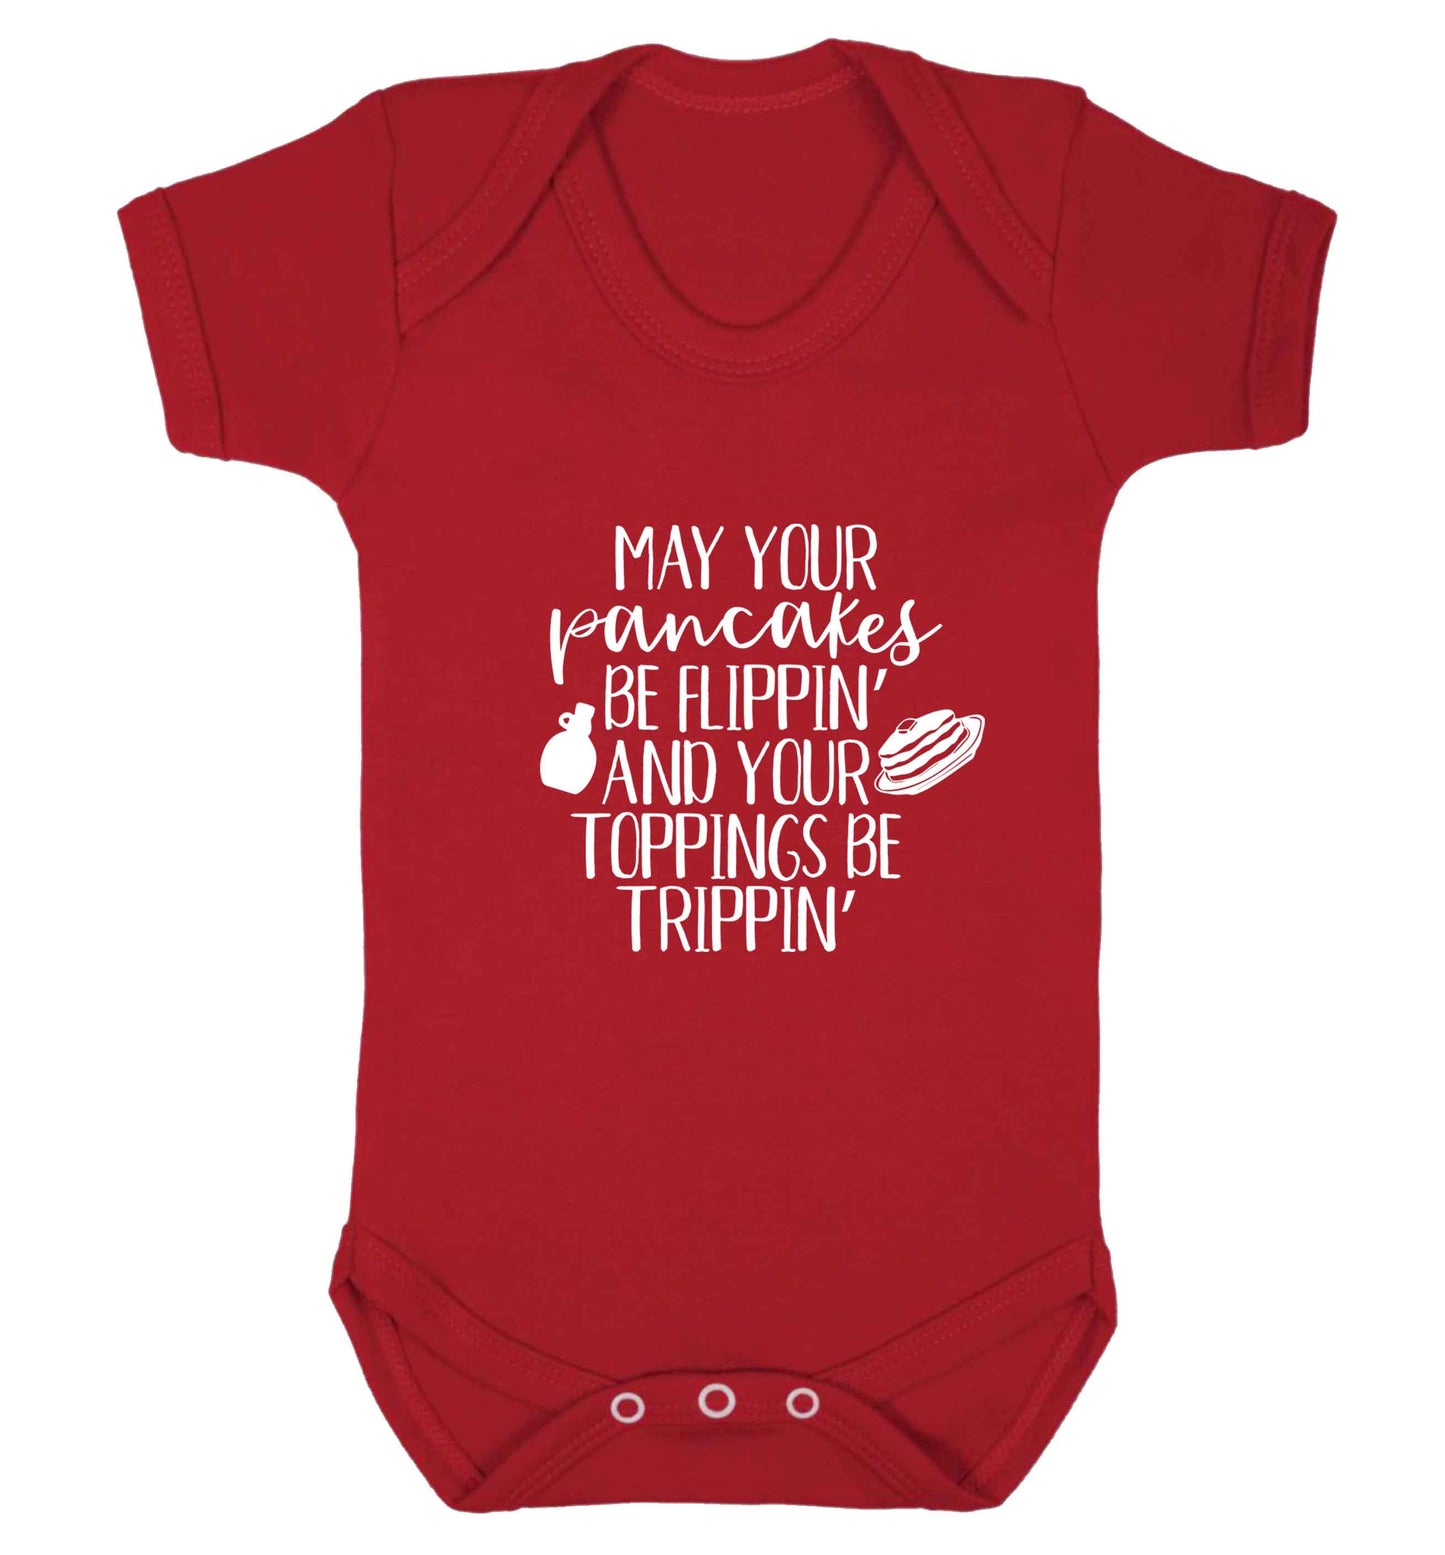 May your pancakes be flippin' and your toppings be trippin' baby vest red 18-24 months